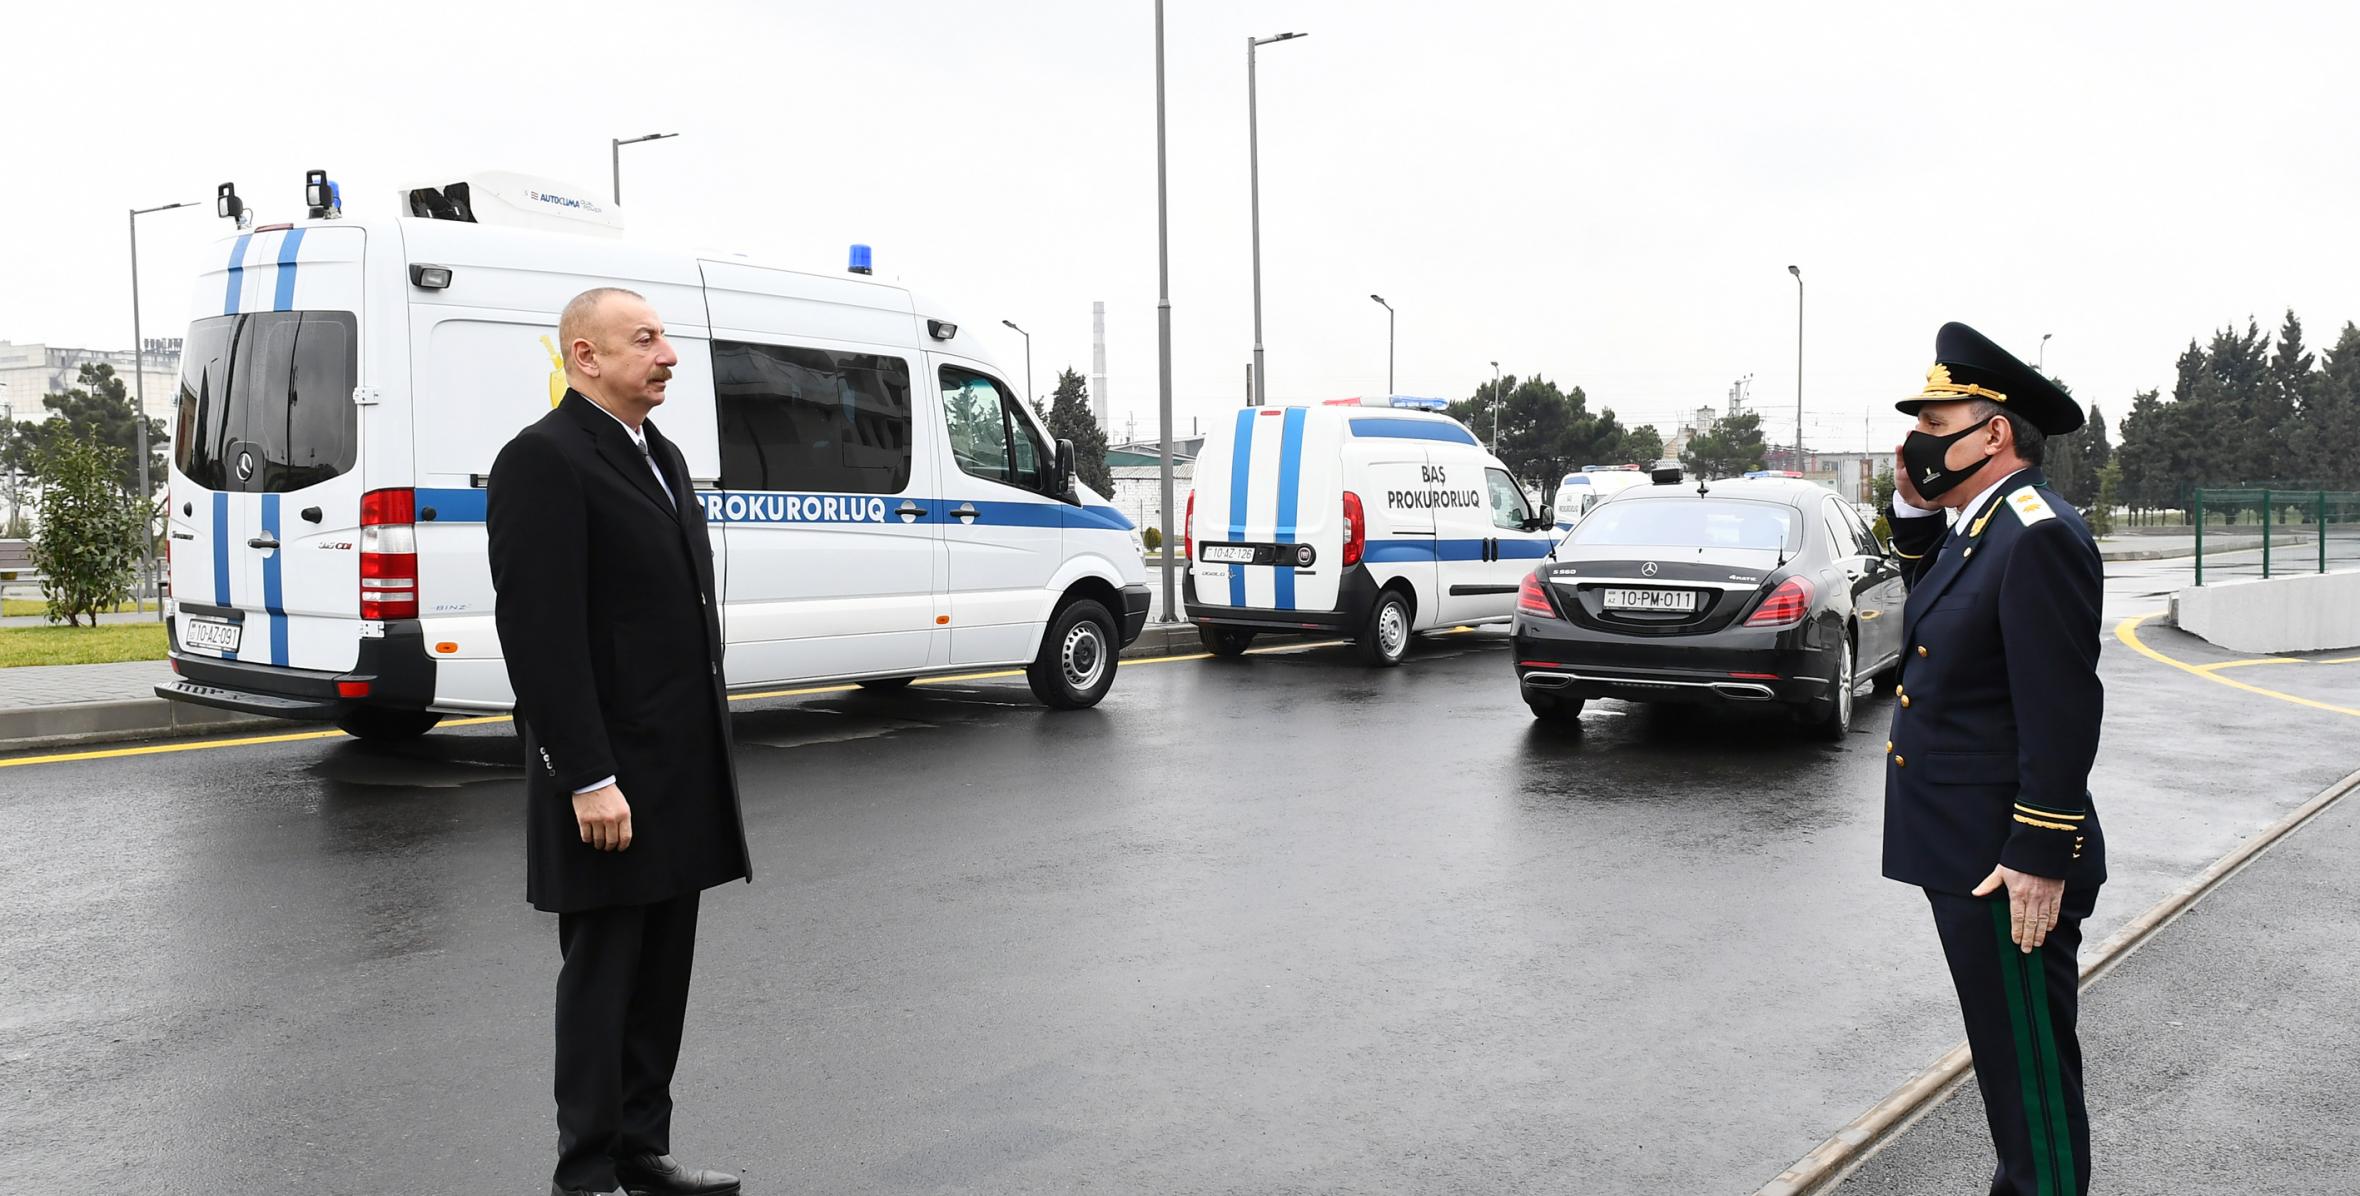 Ilham Aliyev inaugurated new administrative building complex for Prosecutor General’s Office